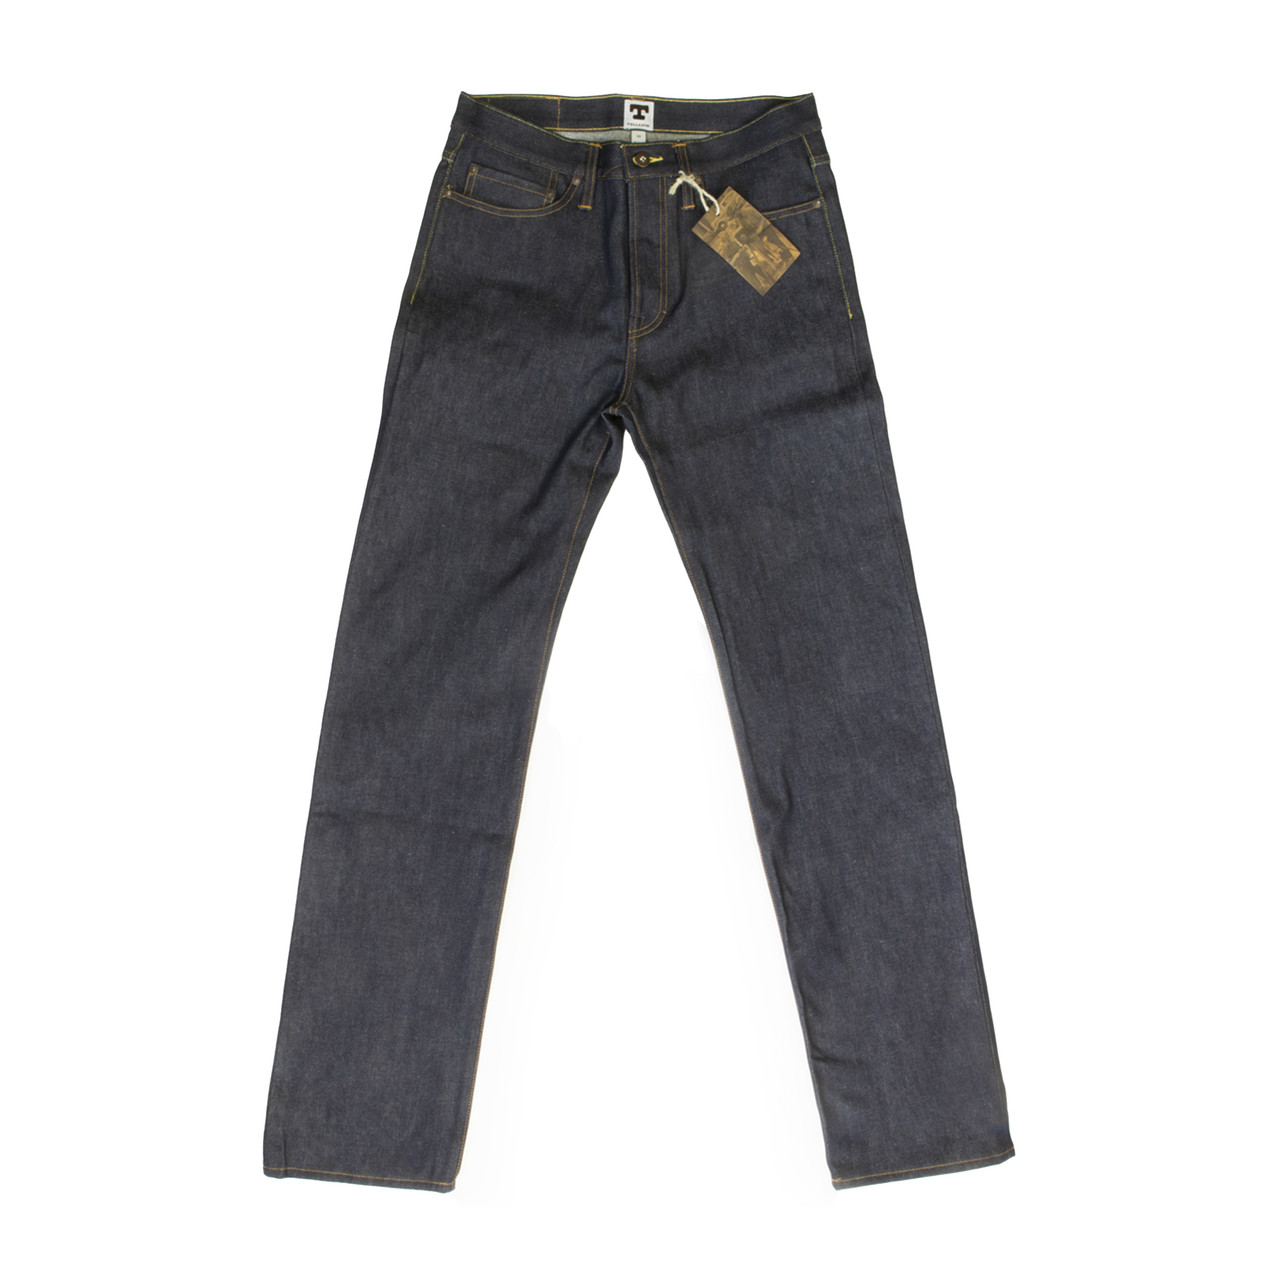 The Scout - Womens Hi-Rise Taper Selvage Denim Jean - Brave Star Selvage